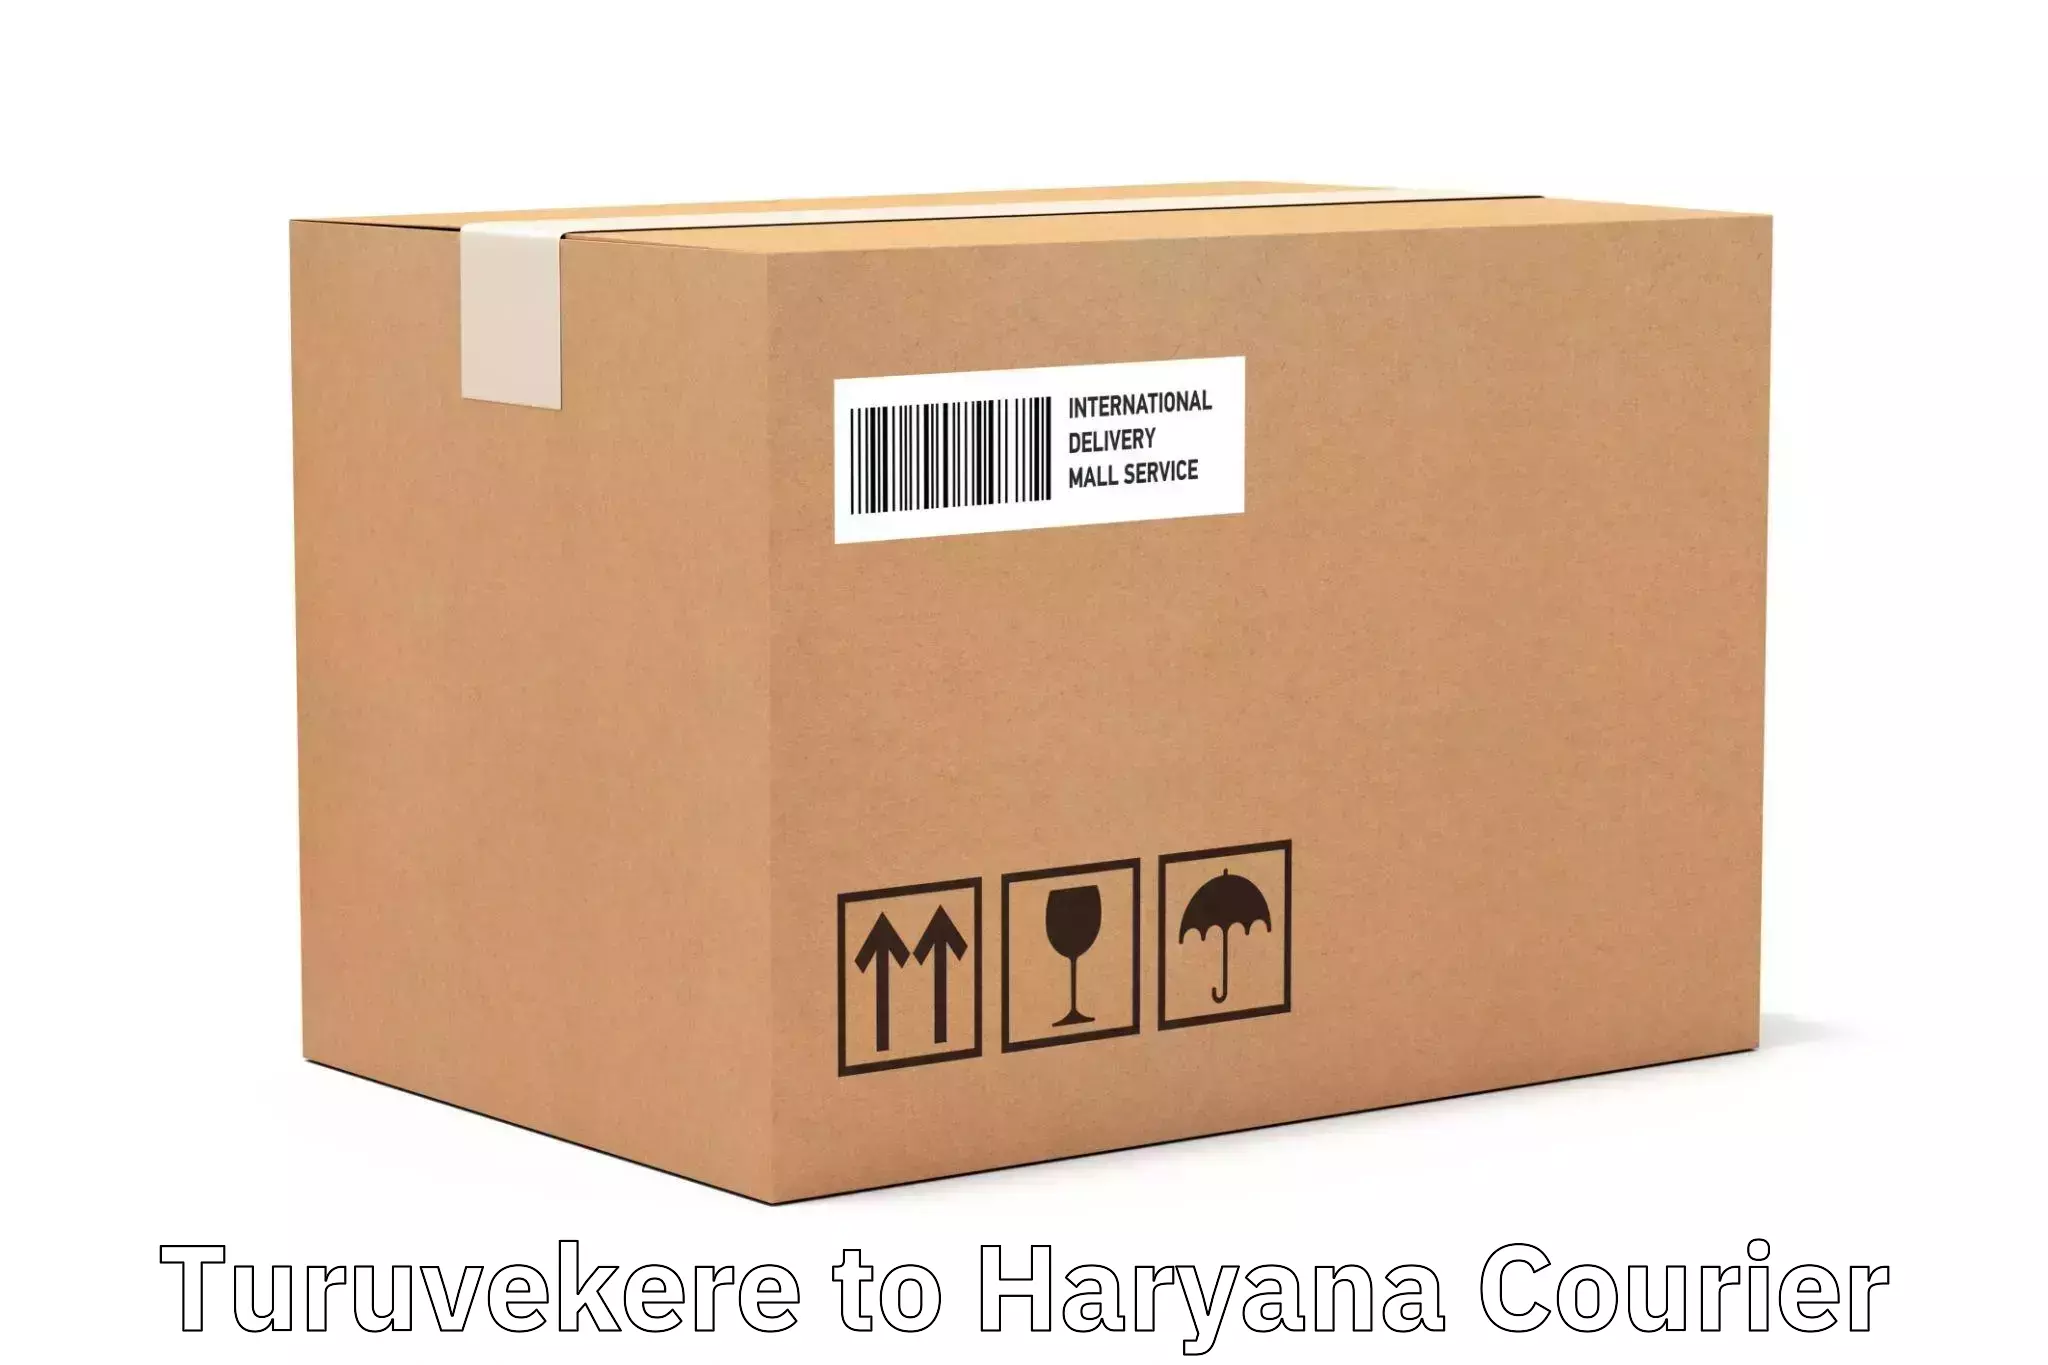 Local delivery service Turuvekere to Haryana